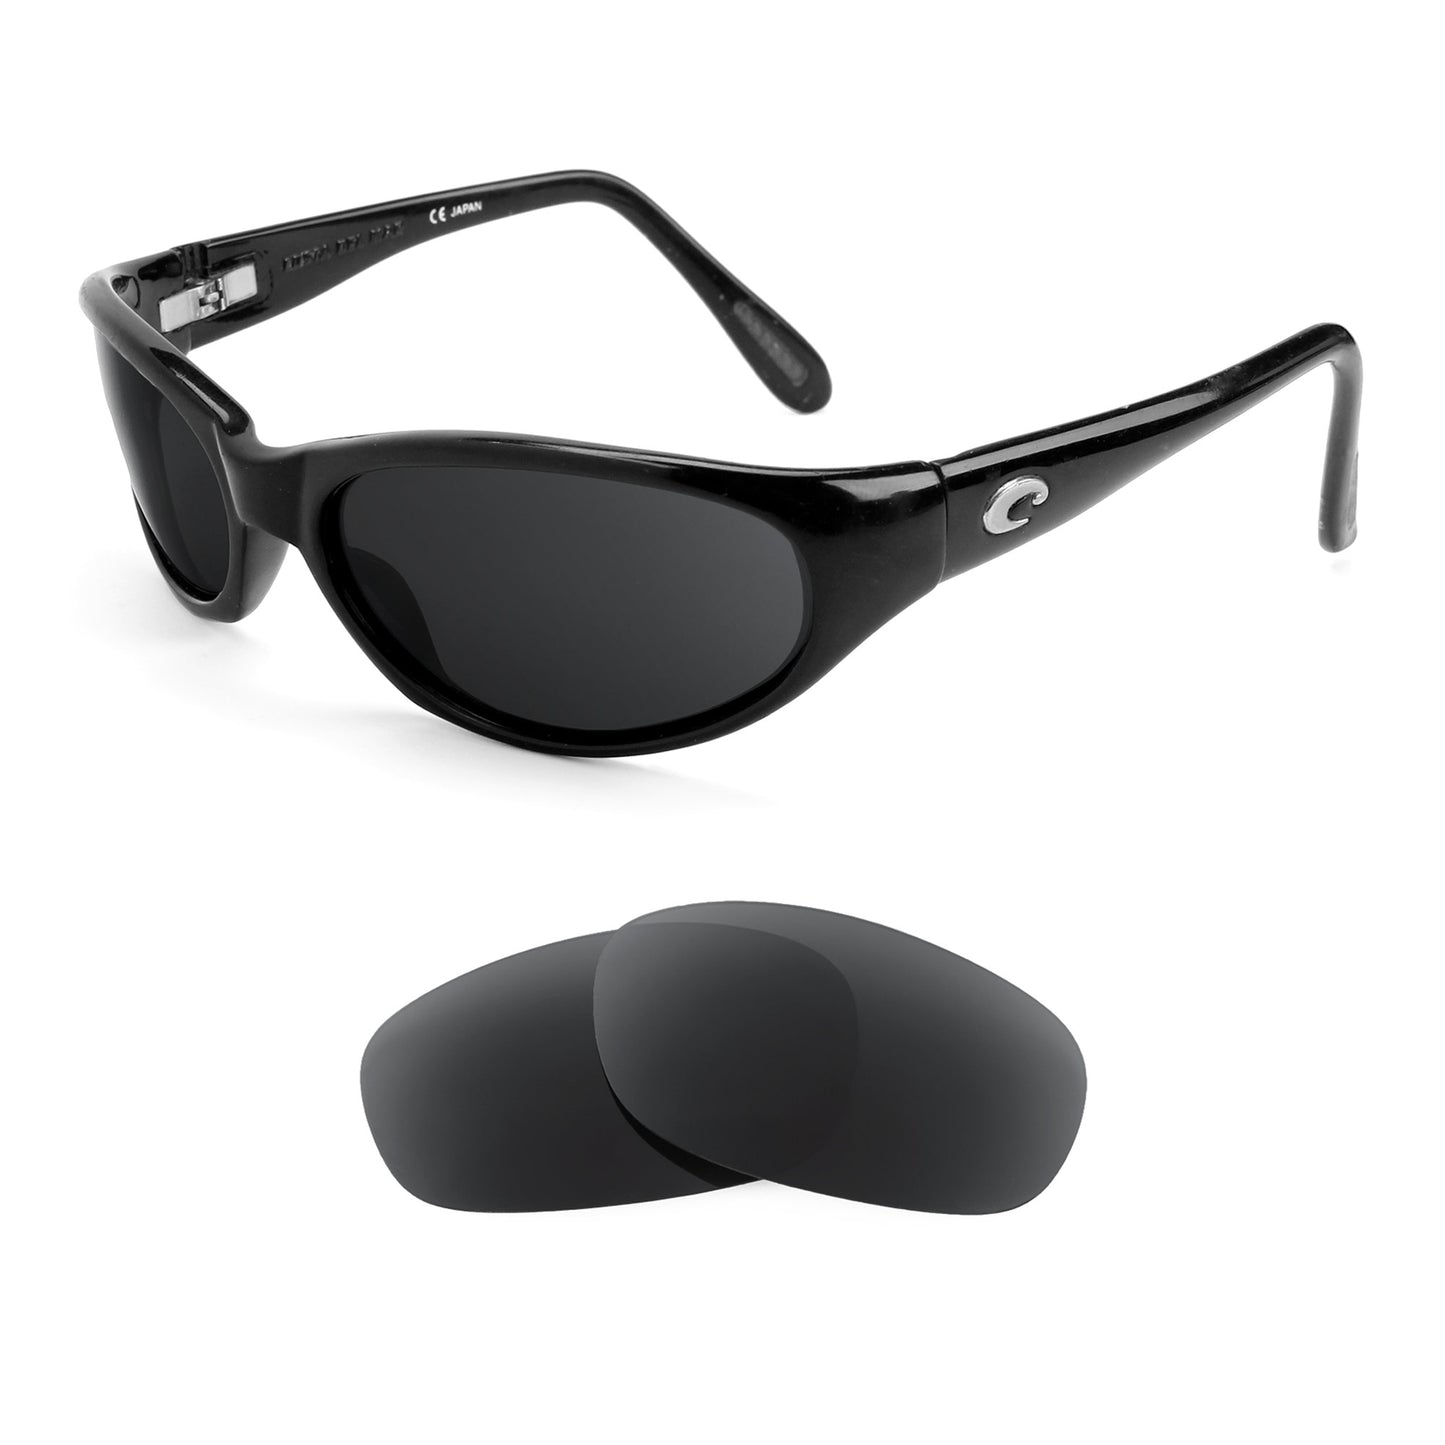 Costa MP2 sunglasses with replacement lenses